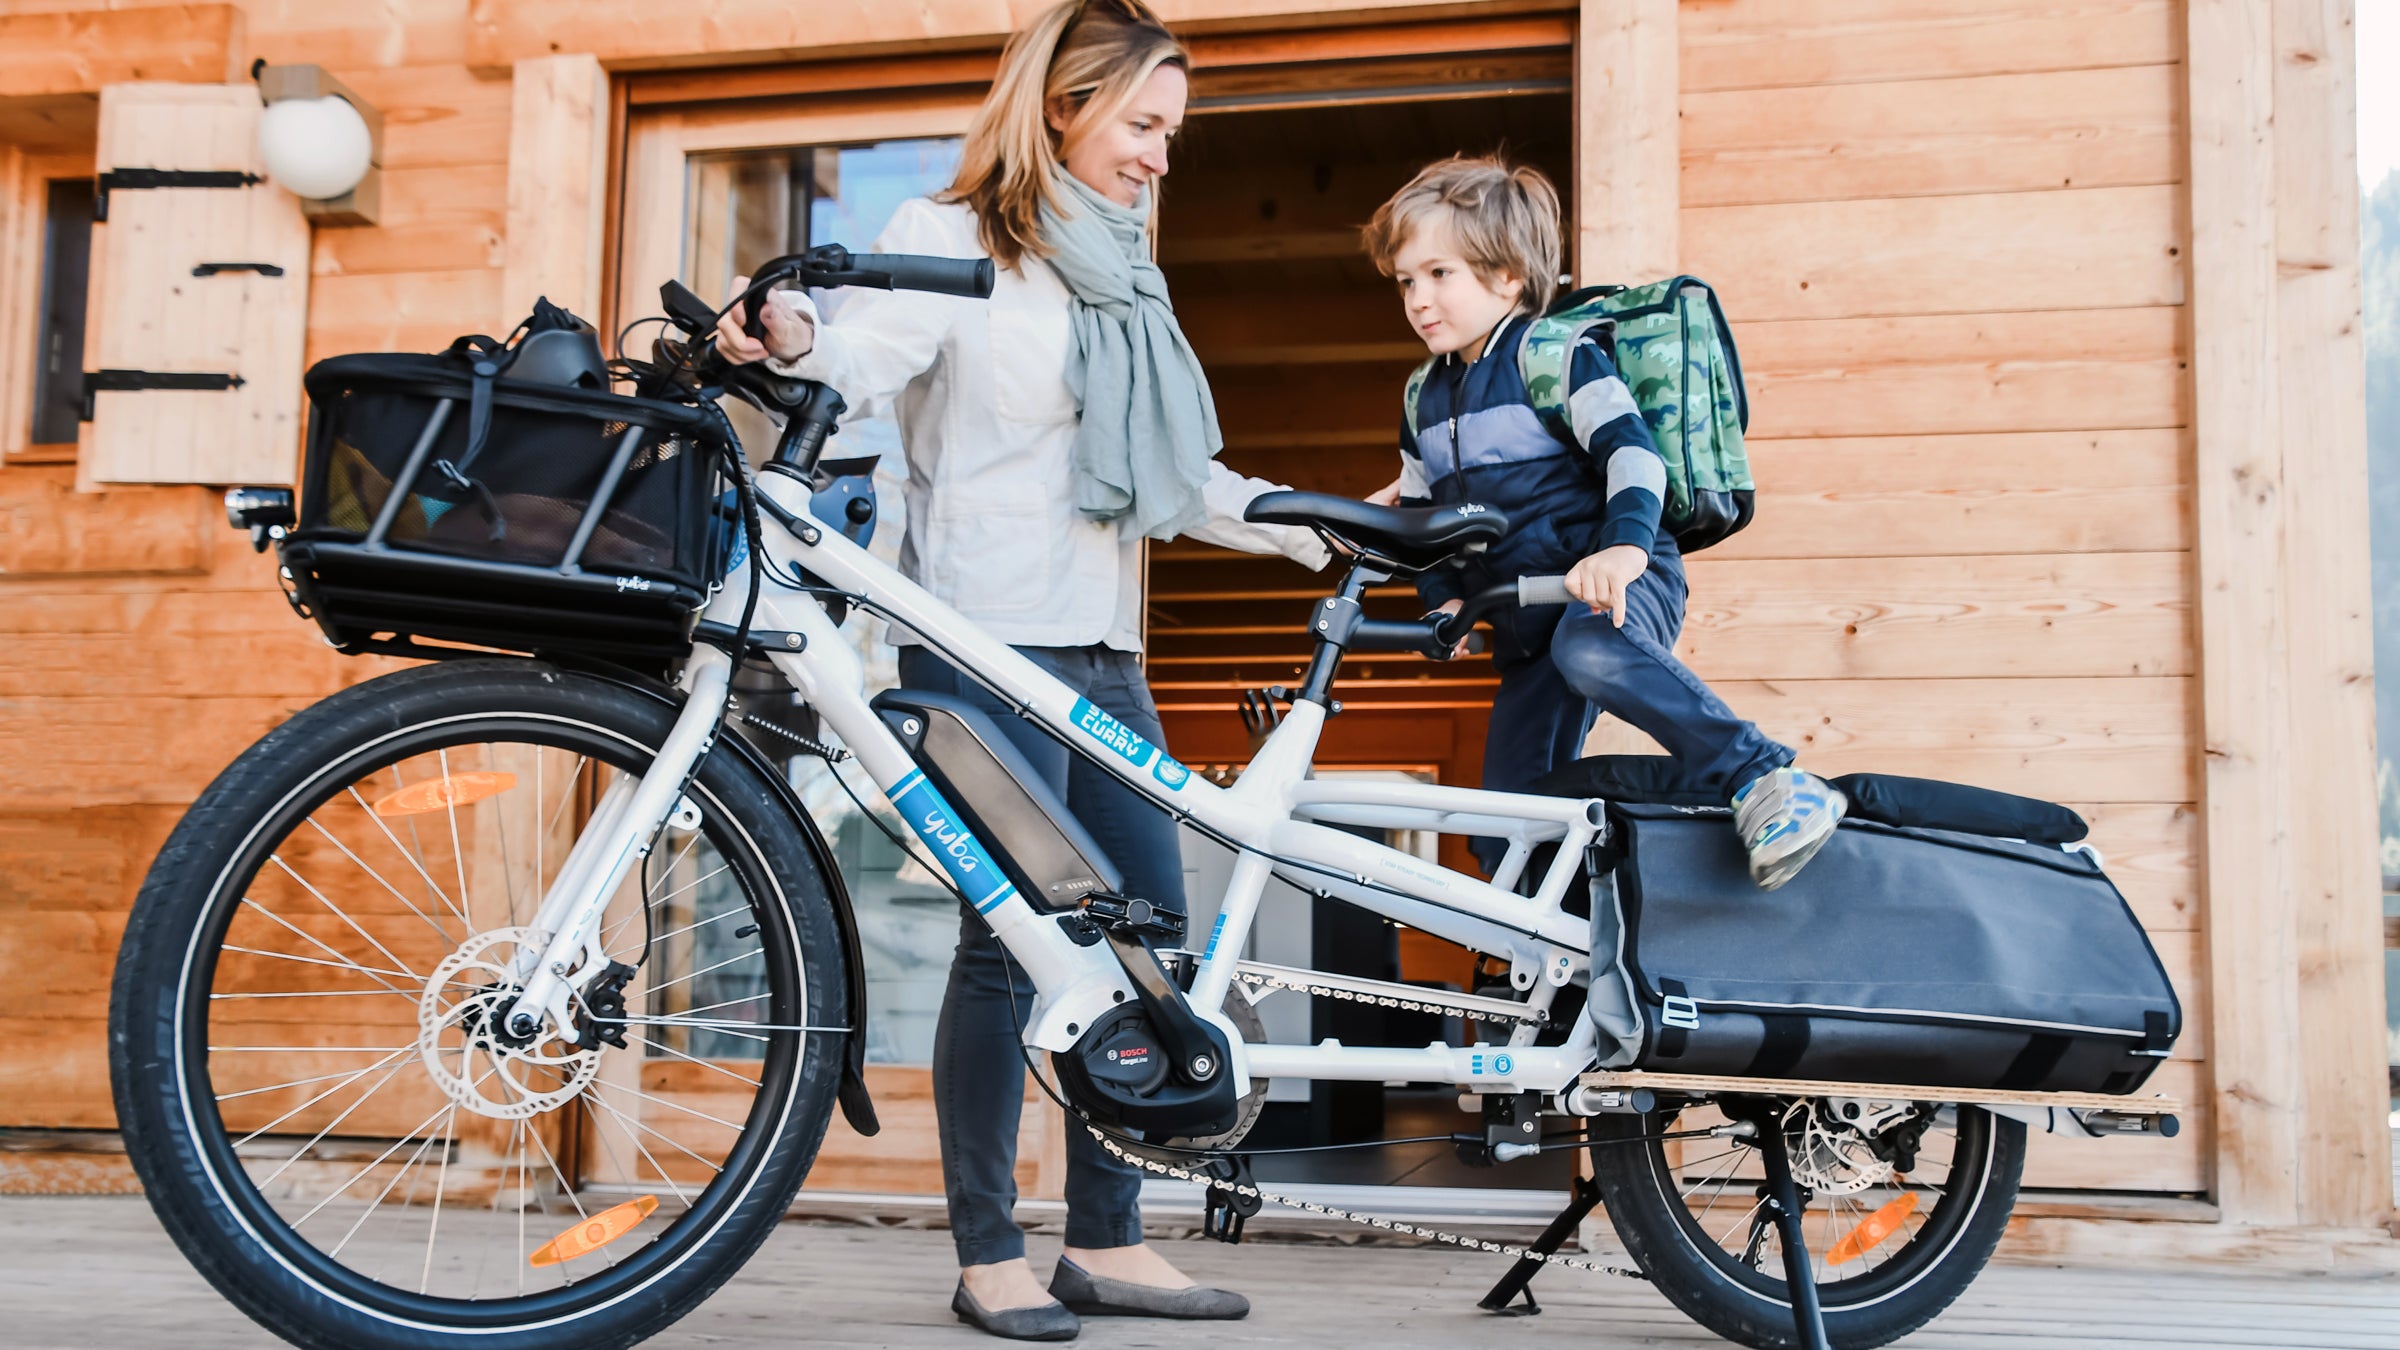 Do You Want to Buy an E-Cargo Bike? Read This First.